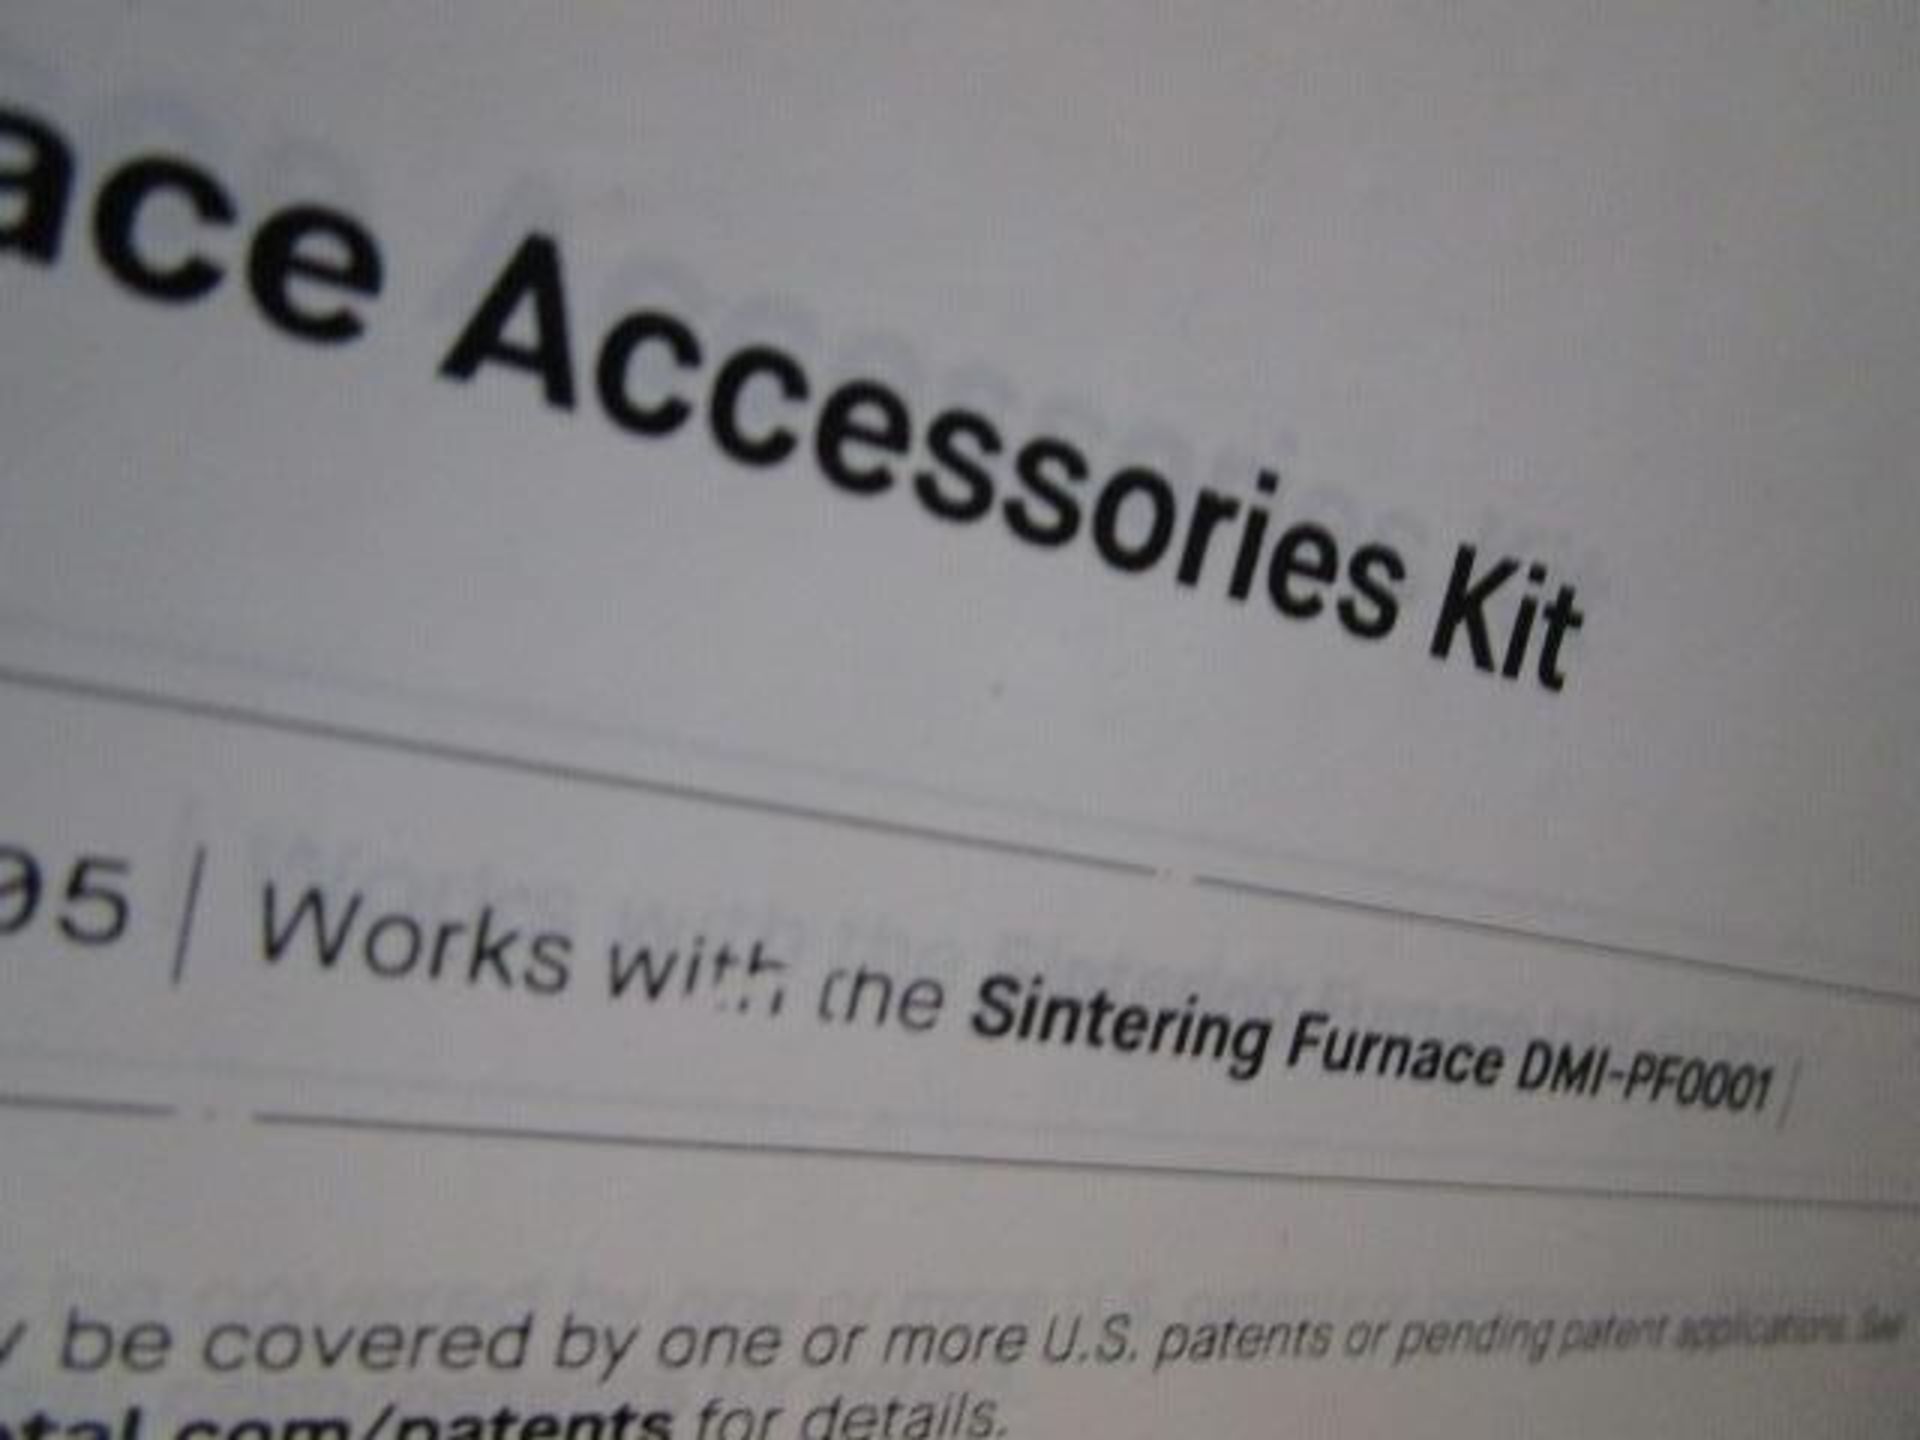 Furnace Accessories Kit - Image 2 of 2